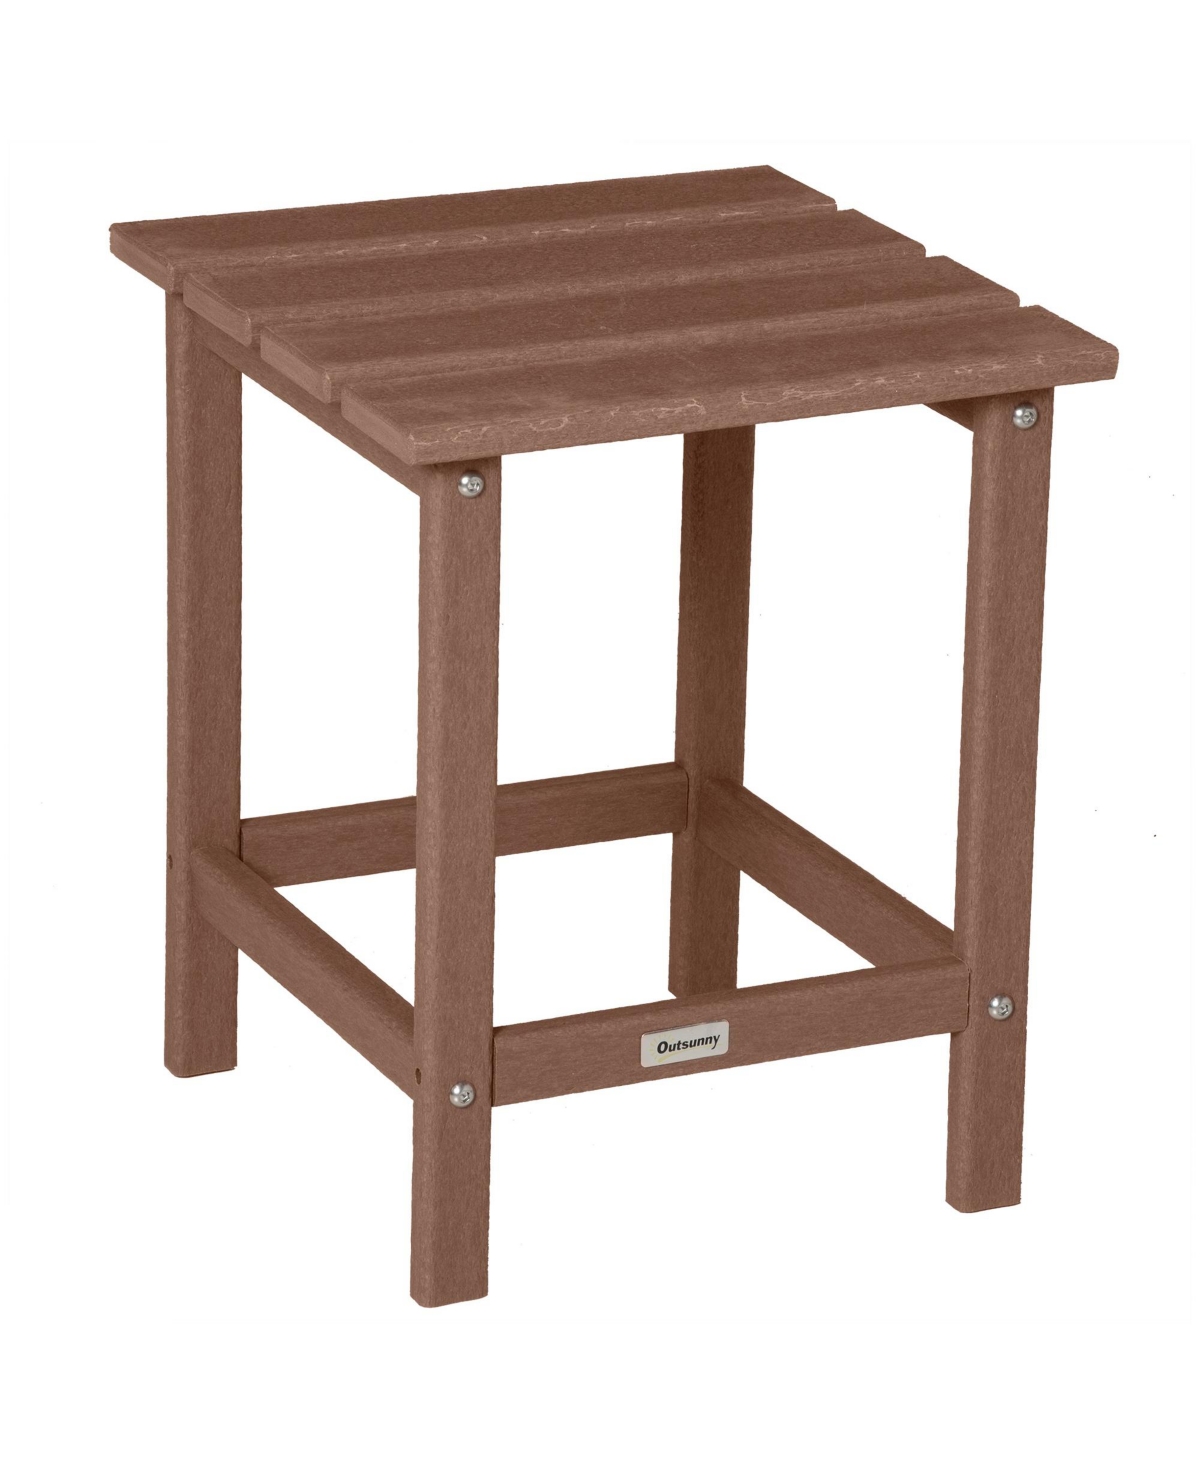 Outsunny Patio Side Table, 18